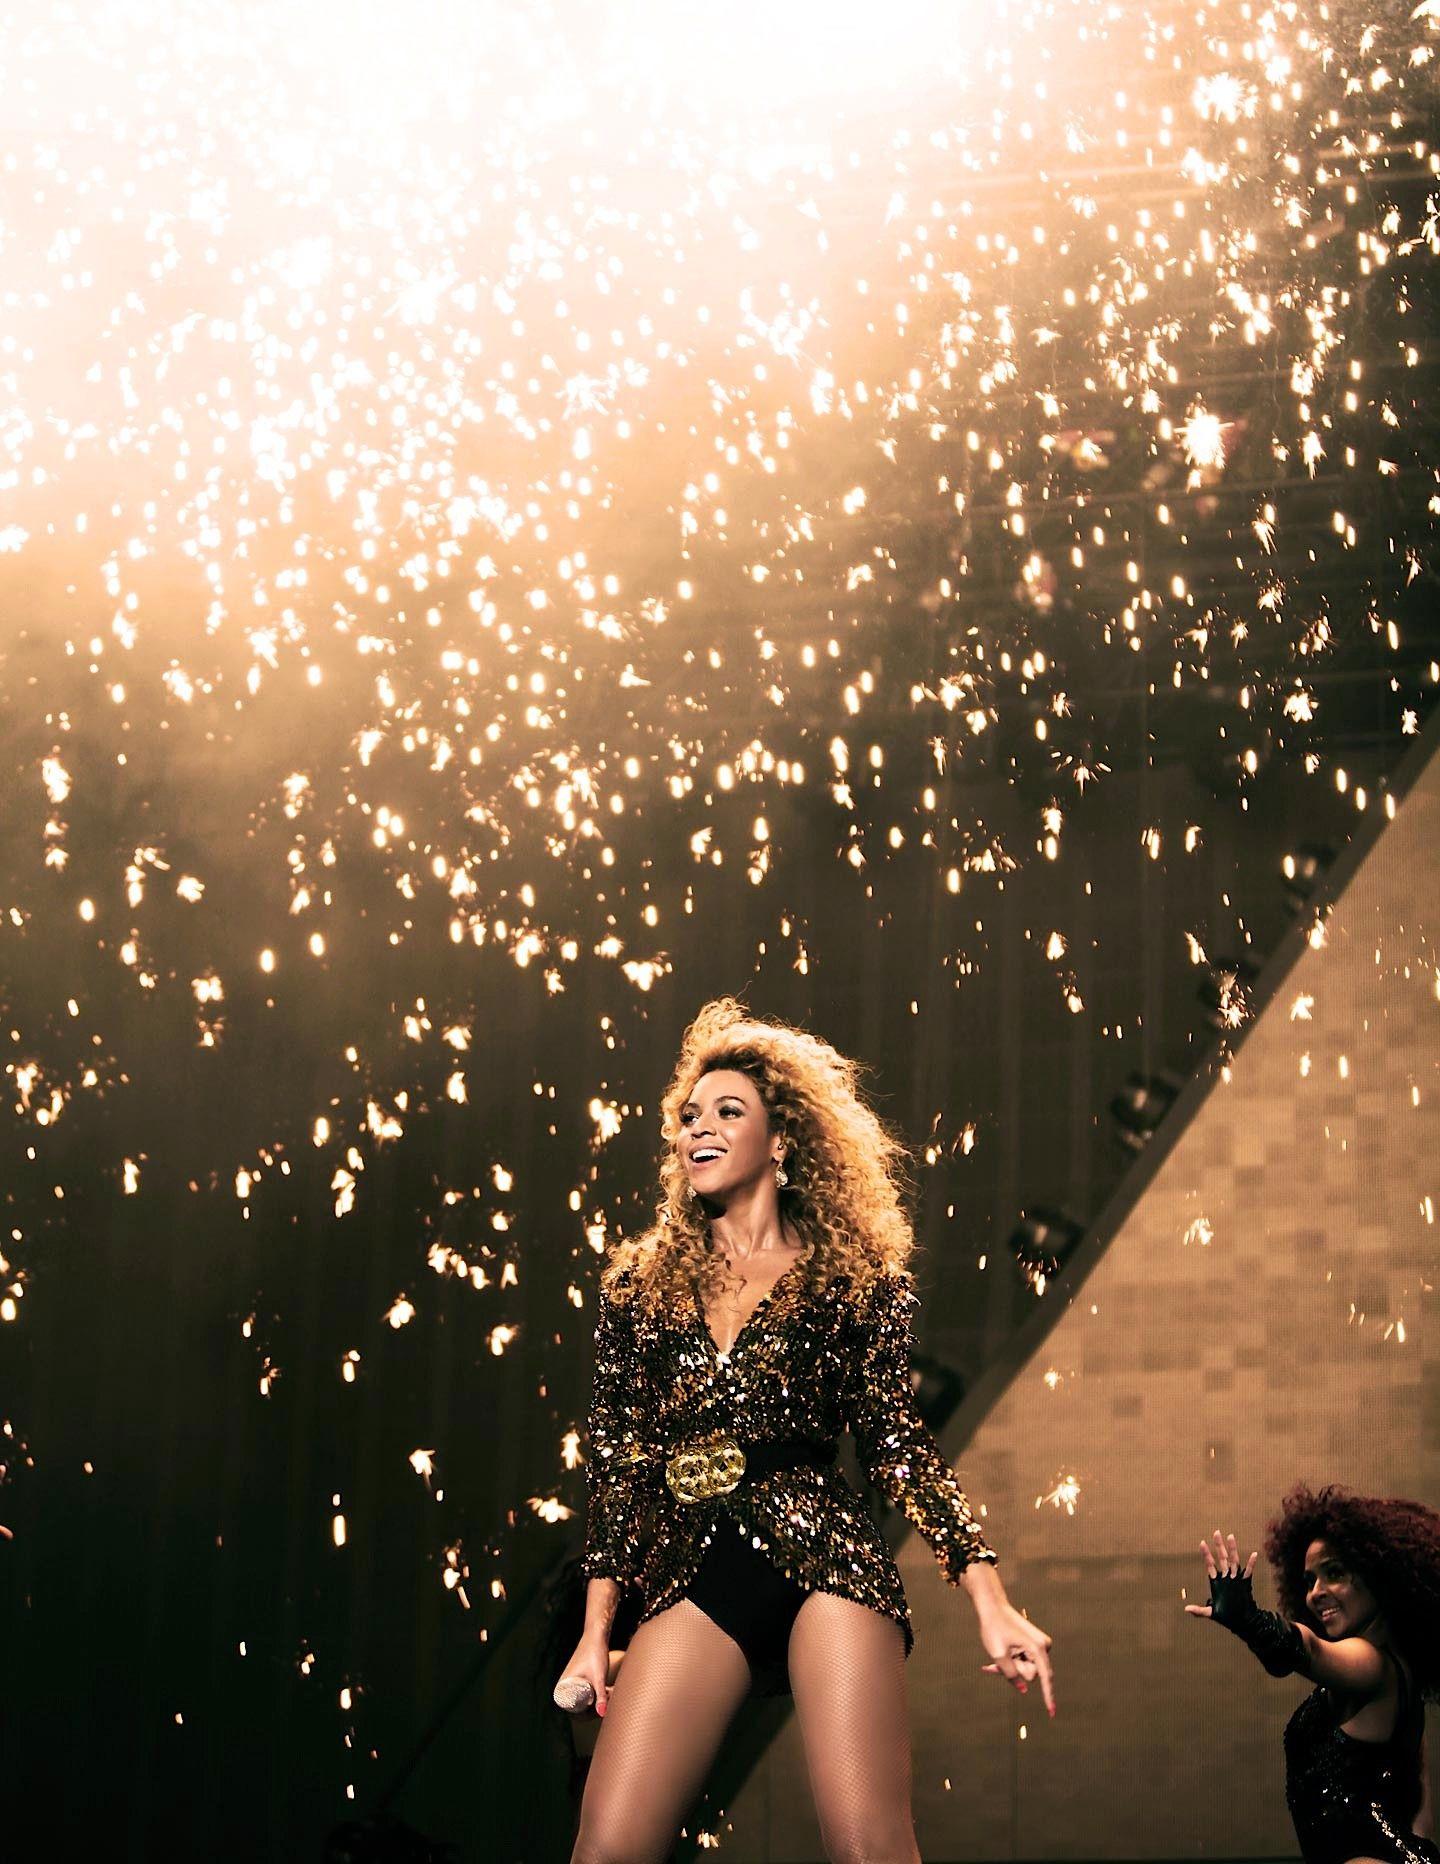 Beyonce iPhone Wallpapers  Wallpaper Cave